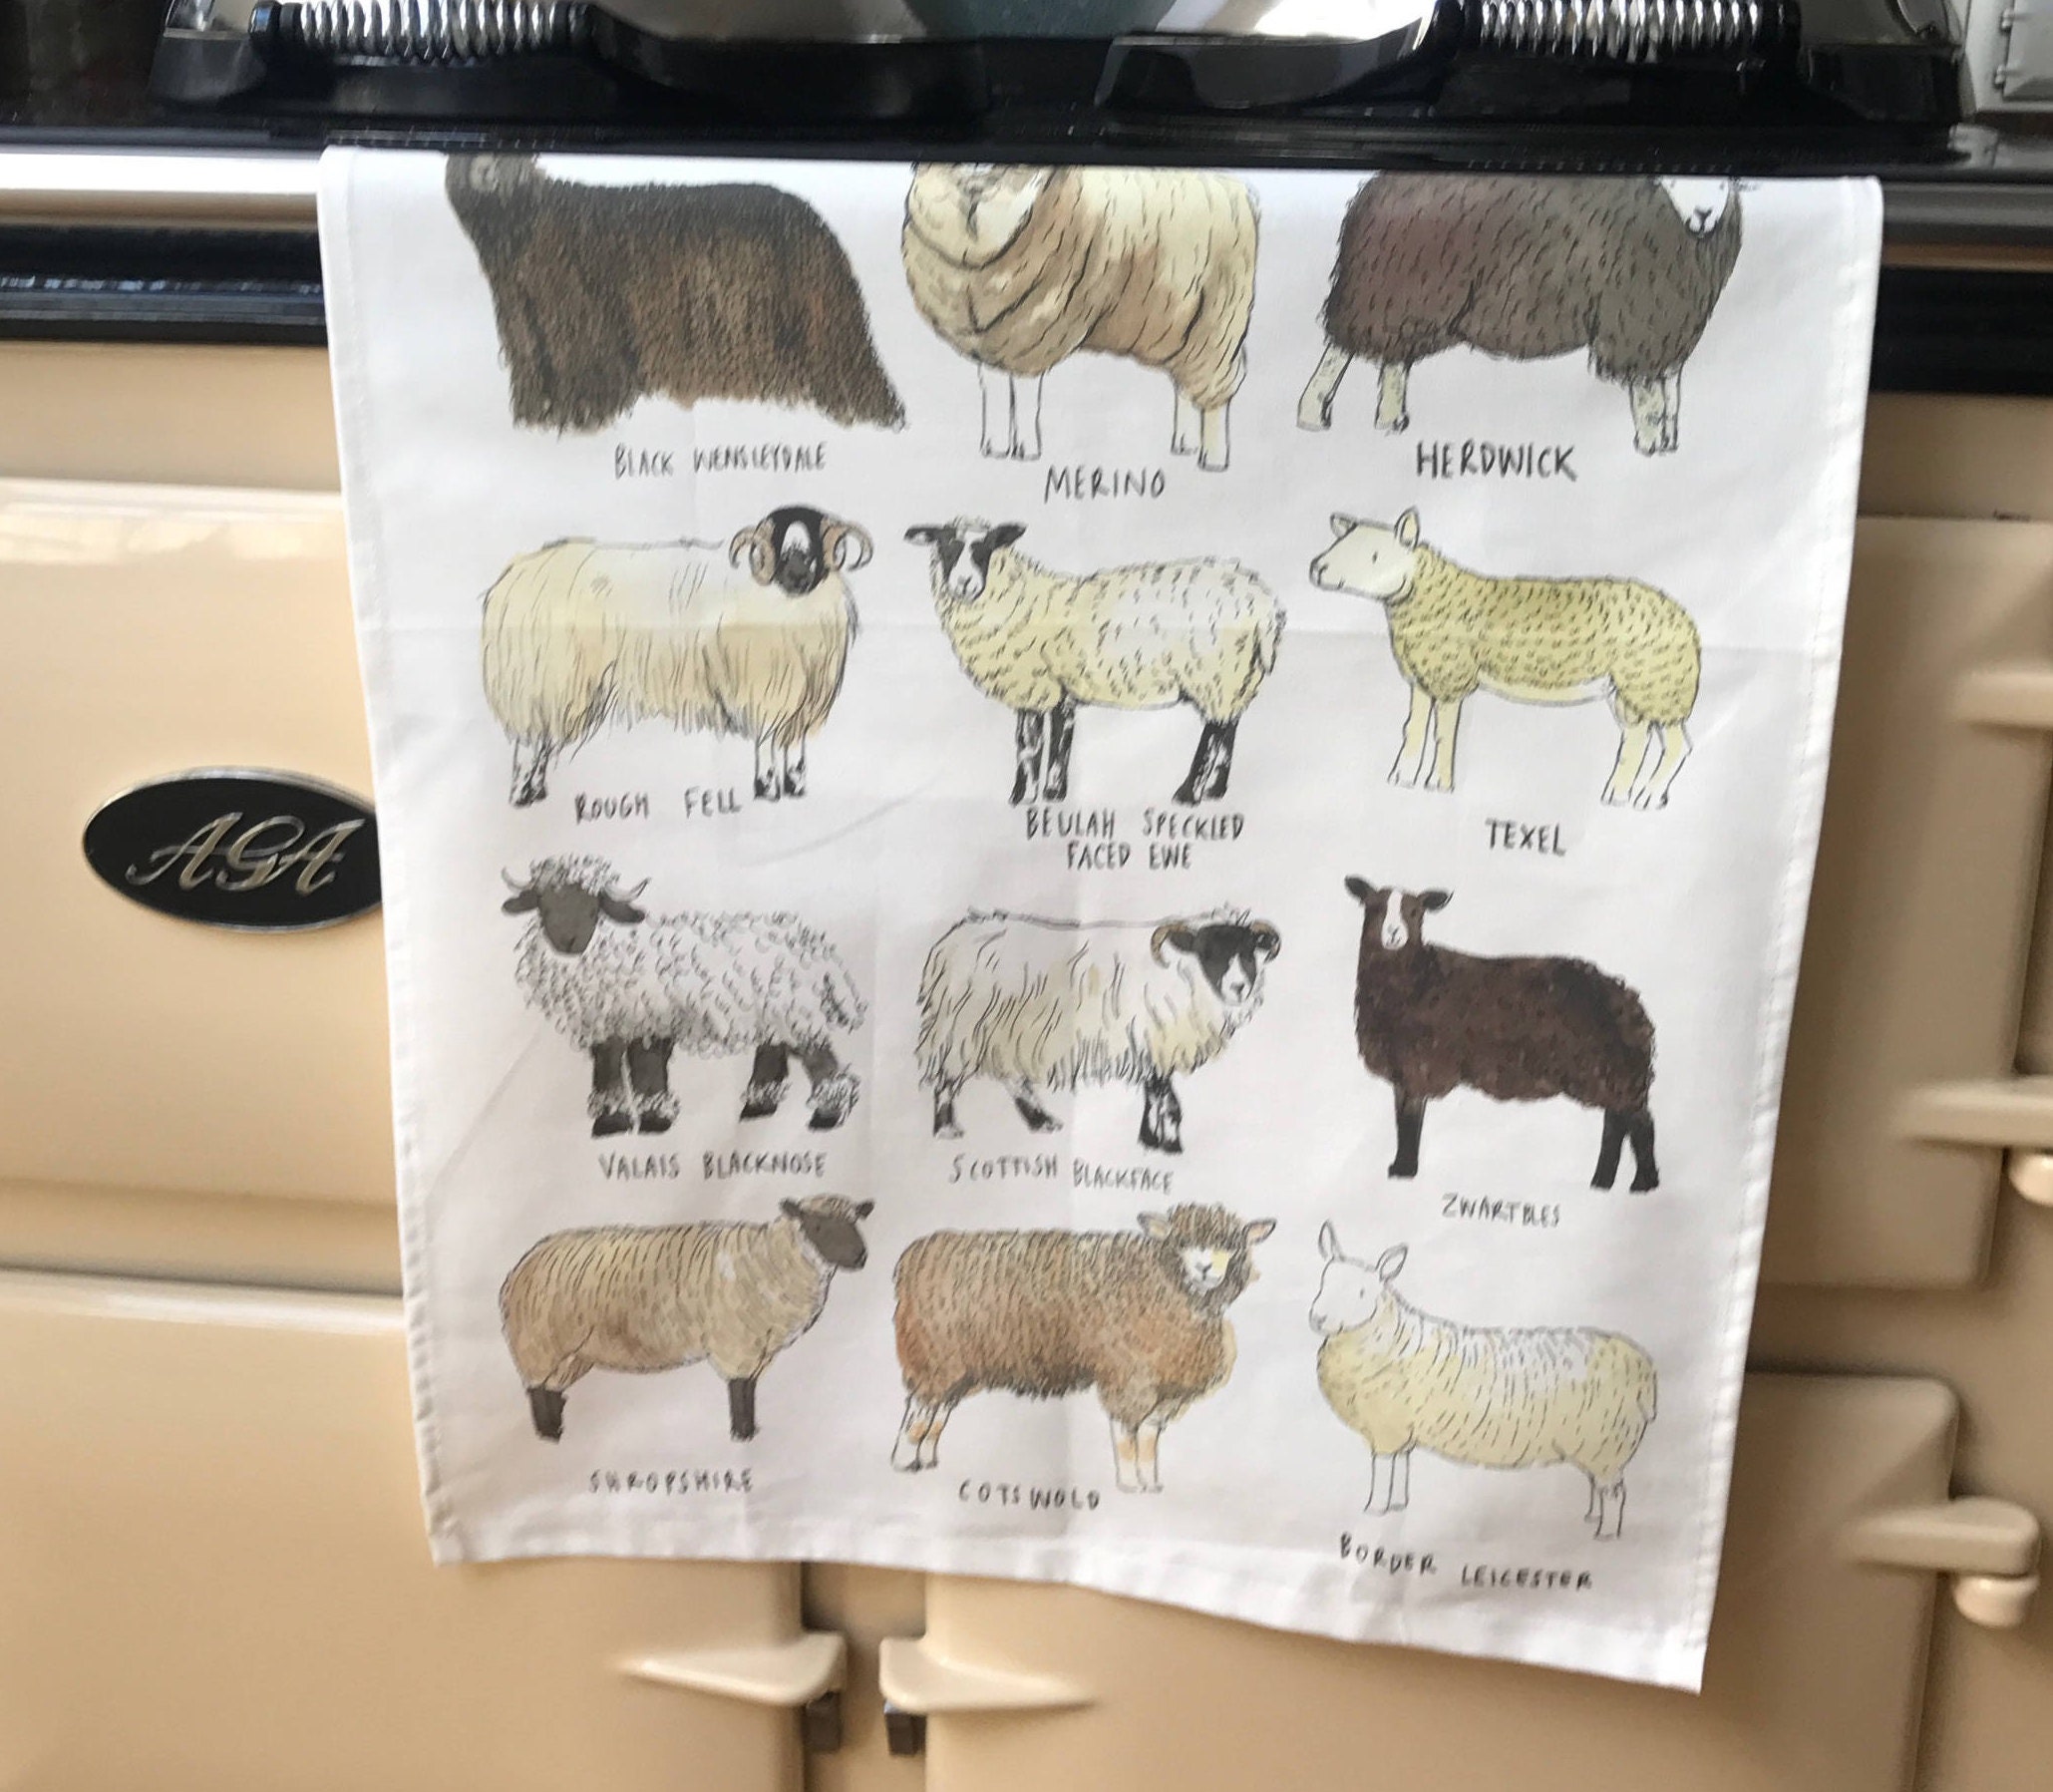 Cead Mile Failte Sheep Of Ireland T-Towel With 4 Sheep Design 